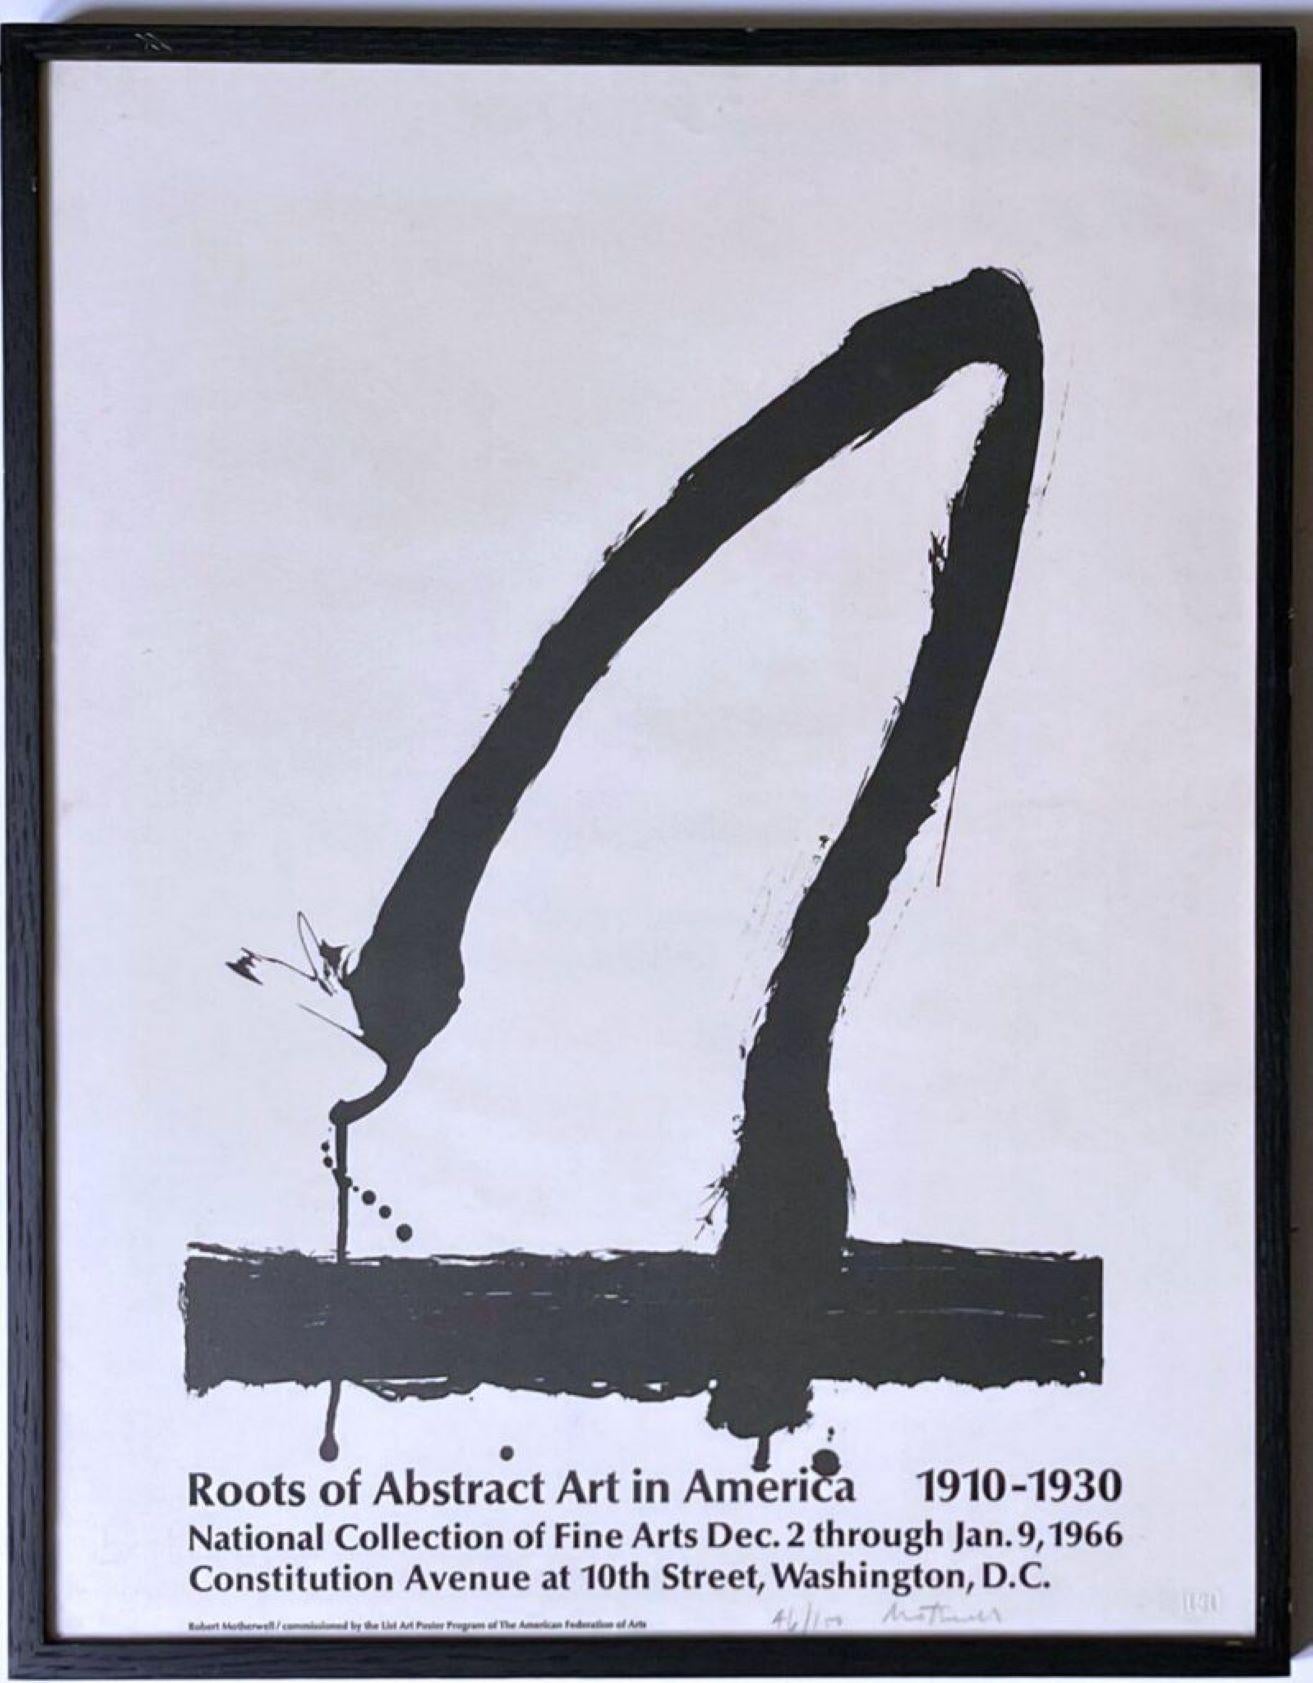 Abstract Print Robert Motherwell - Roots of Abstract Art in America, du tirage limité signé à la main VIP